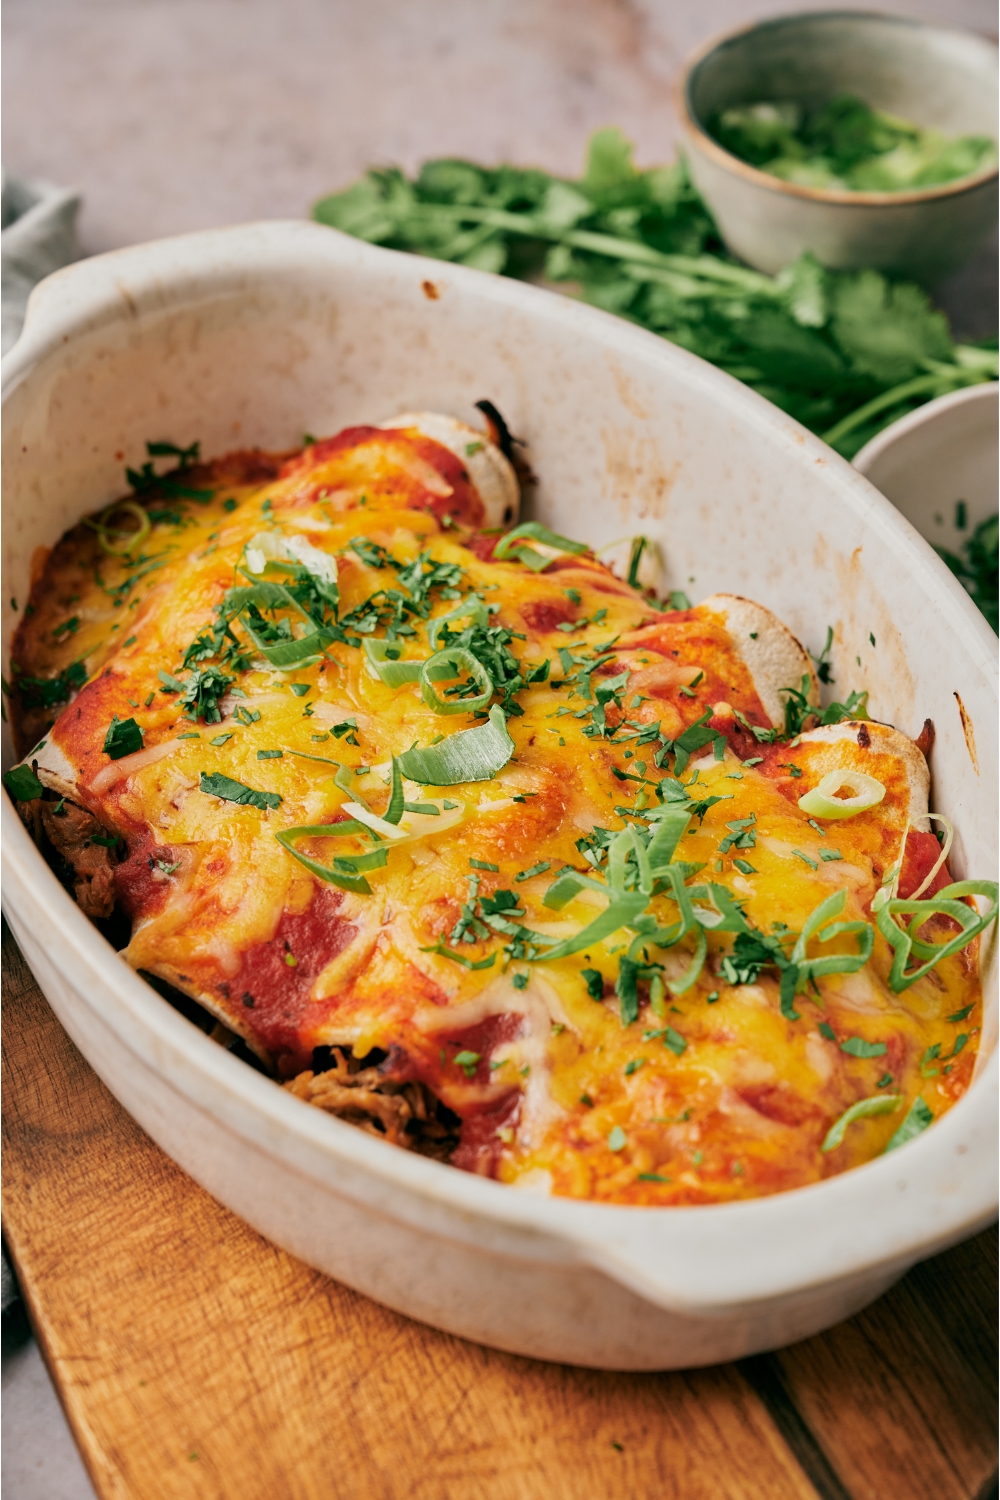 A baking dish atop a wood board filled with freshly baked pork enchiladas covered in melted cheese and fresh herbs.